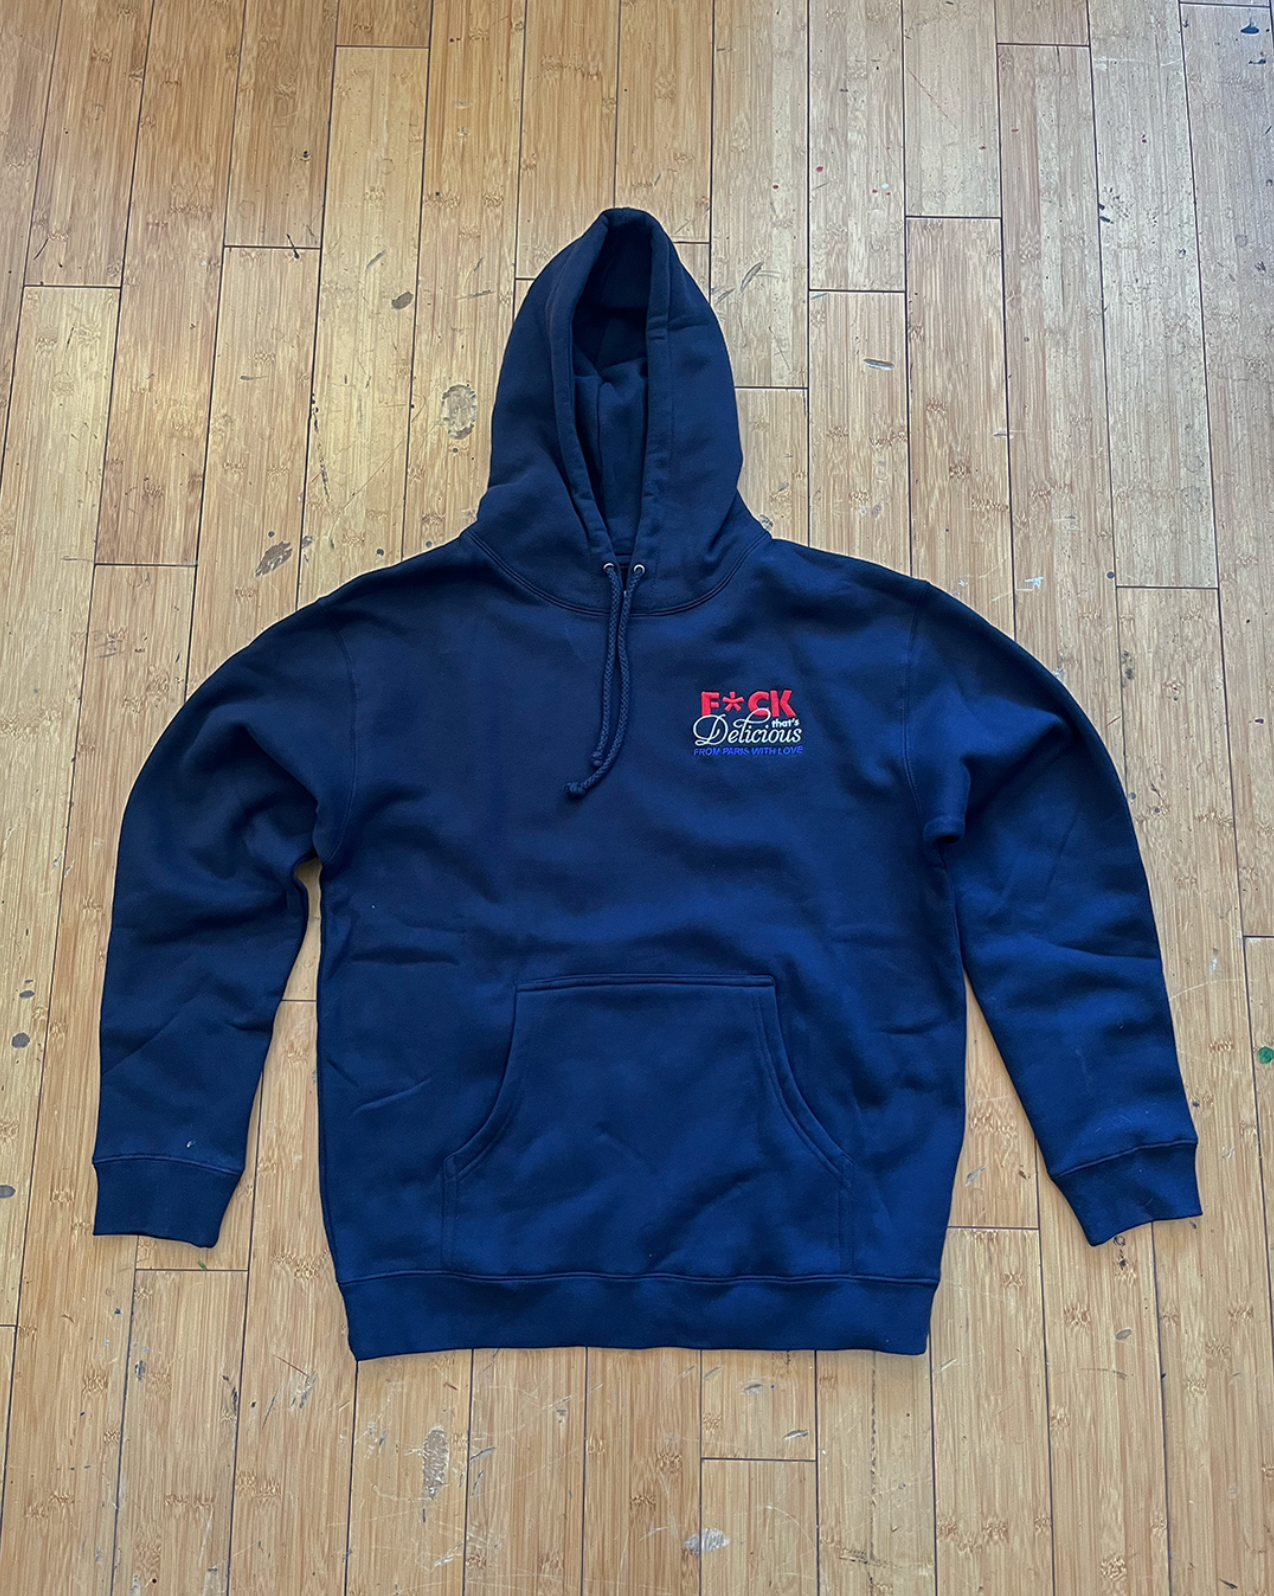 F*CK THAT'S DELICIOUS "FROM PARIS WITH LOVE" NAVY BLUE HOODIE